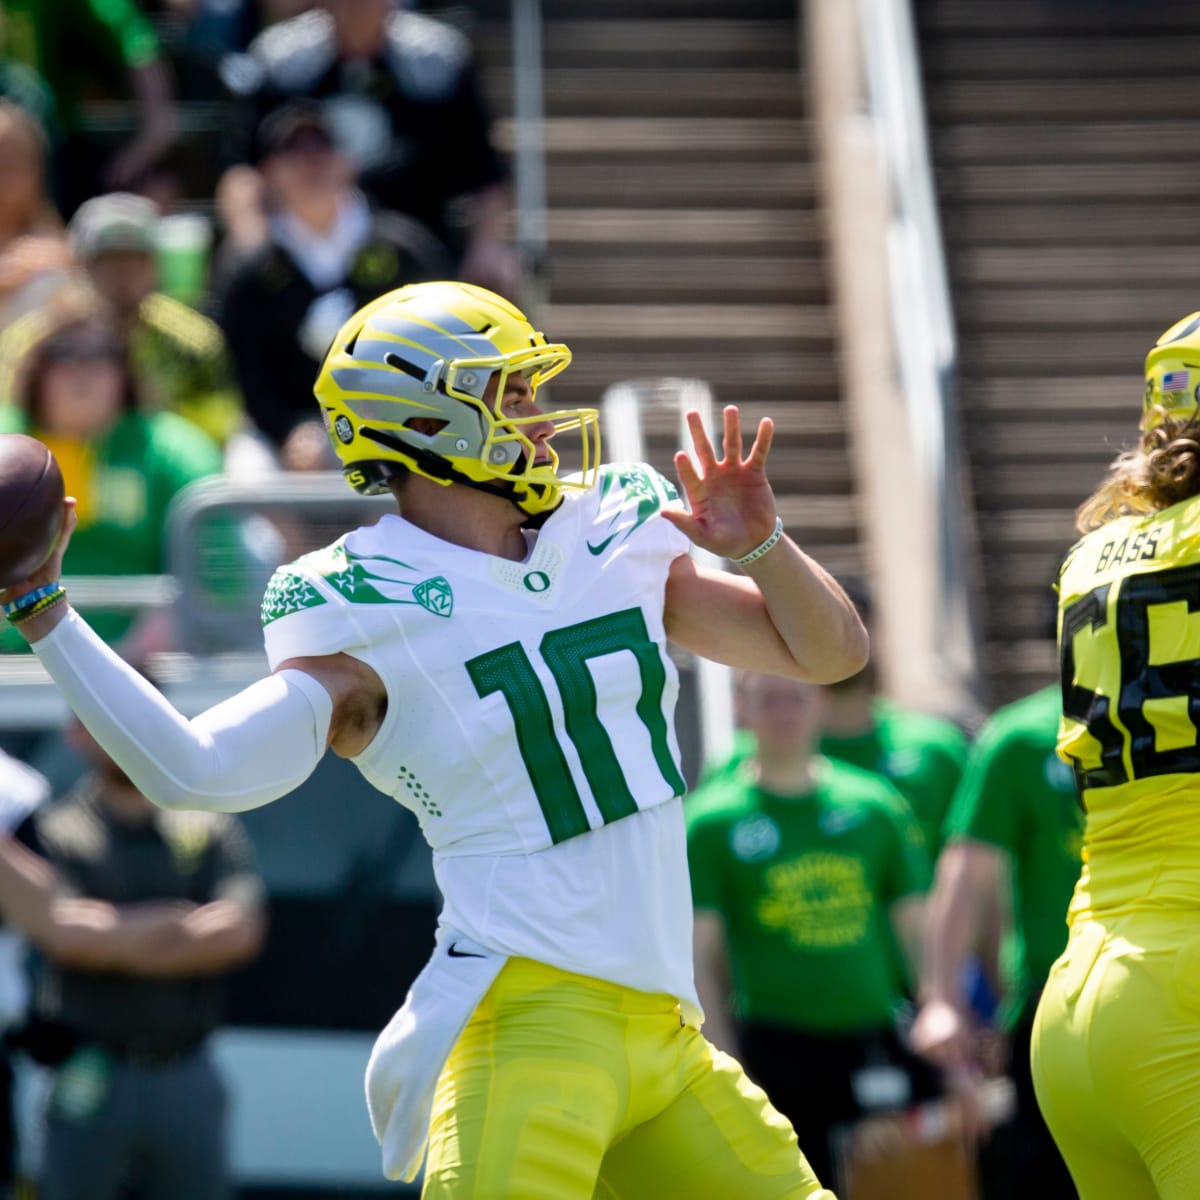 Oregon rumored to be going after Dillon Gabriel to replace Bo Nix